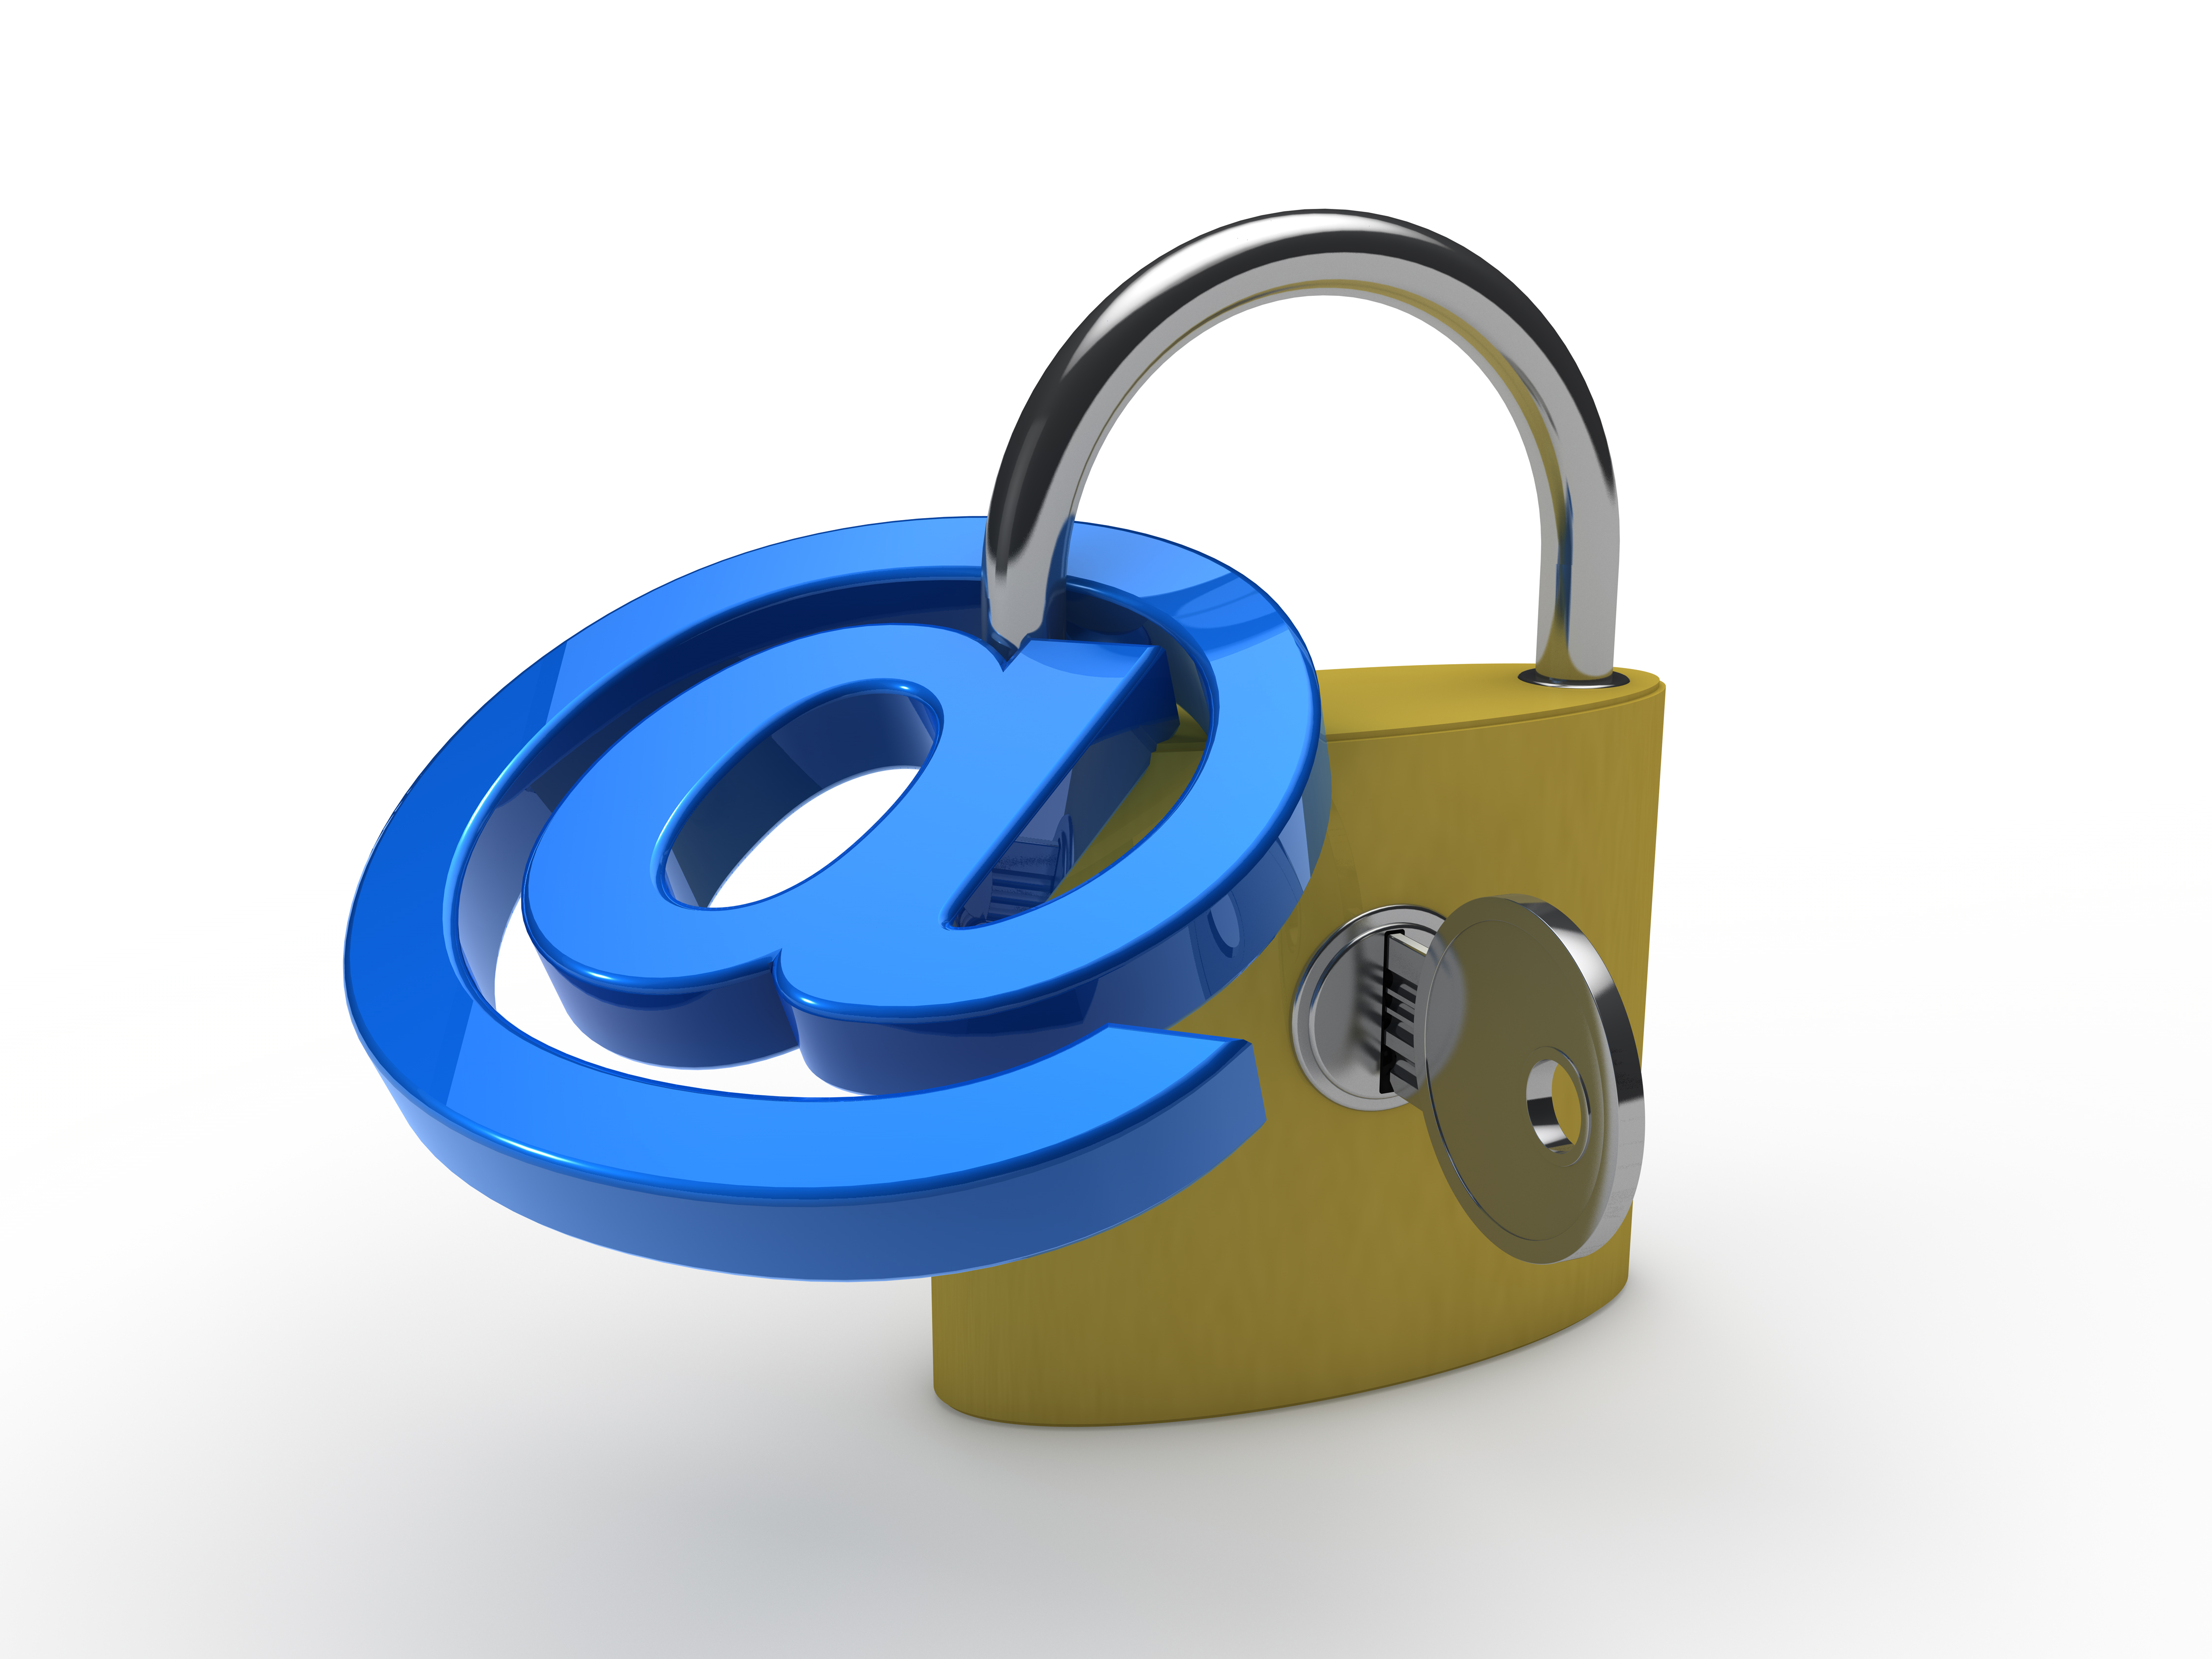  Email Security for Your Business